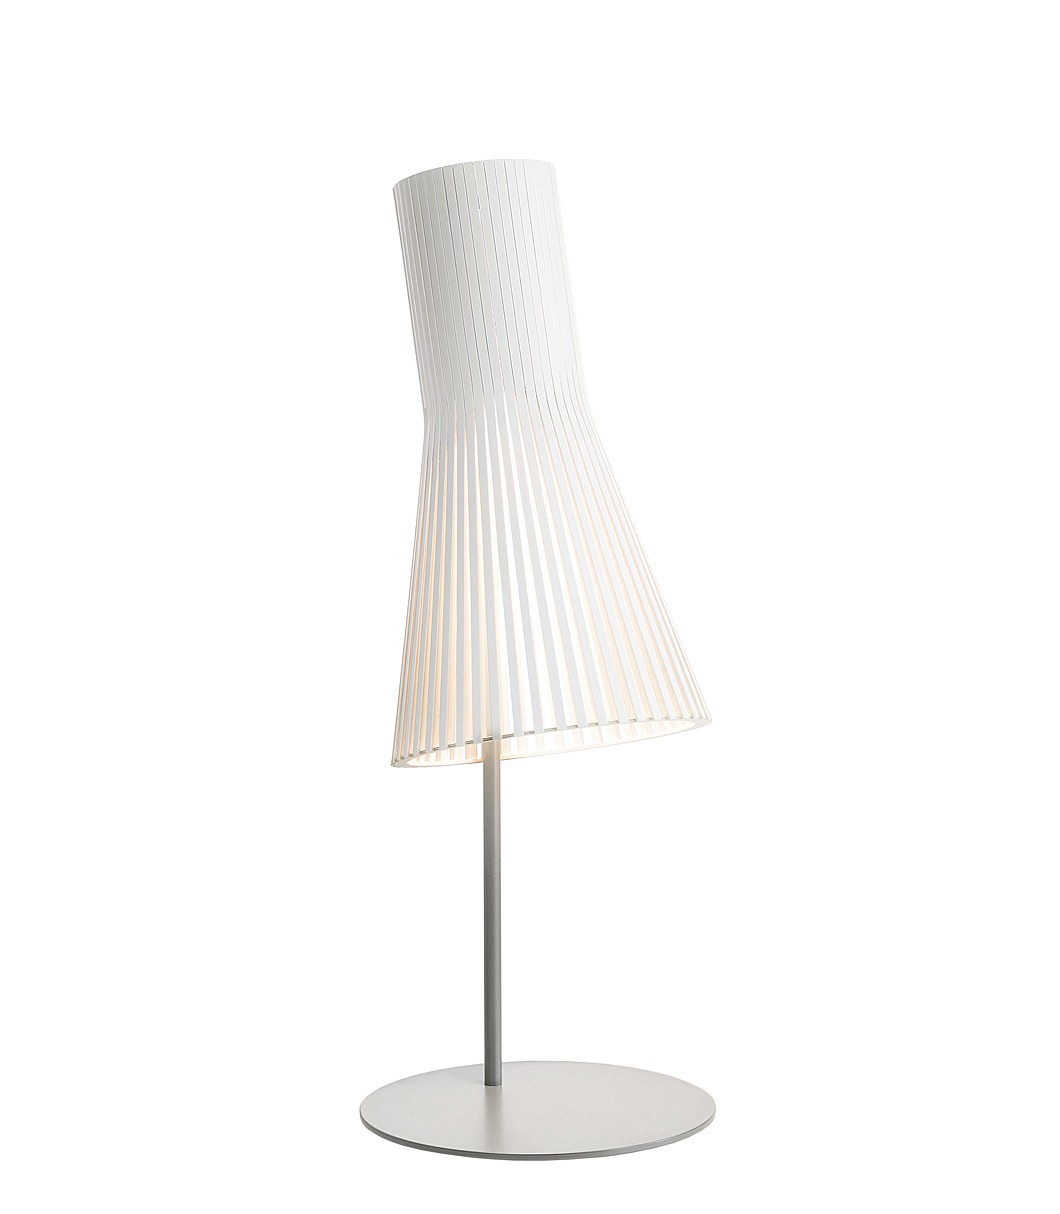 Secto 4220 table lamp is available in white laminated